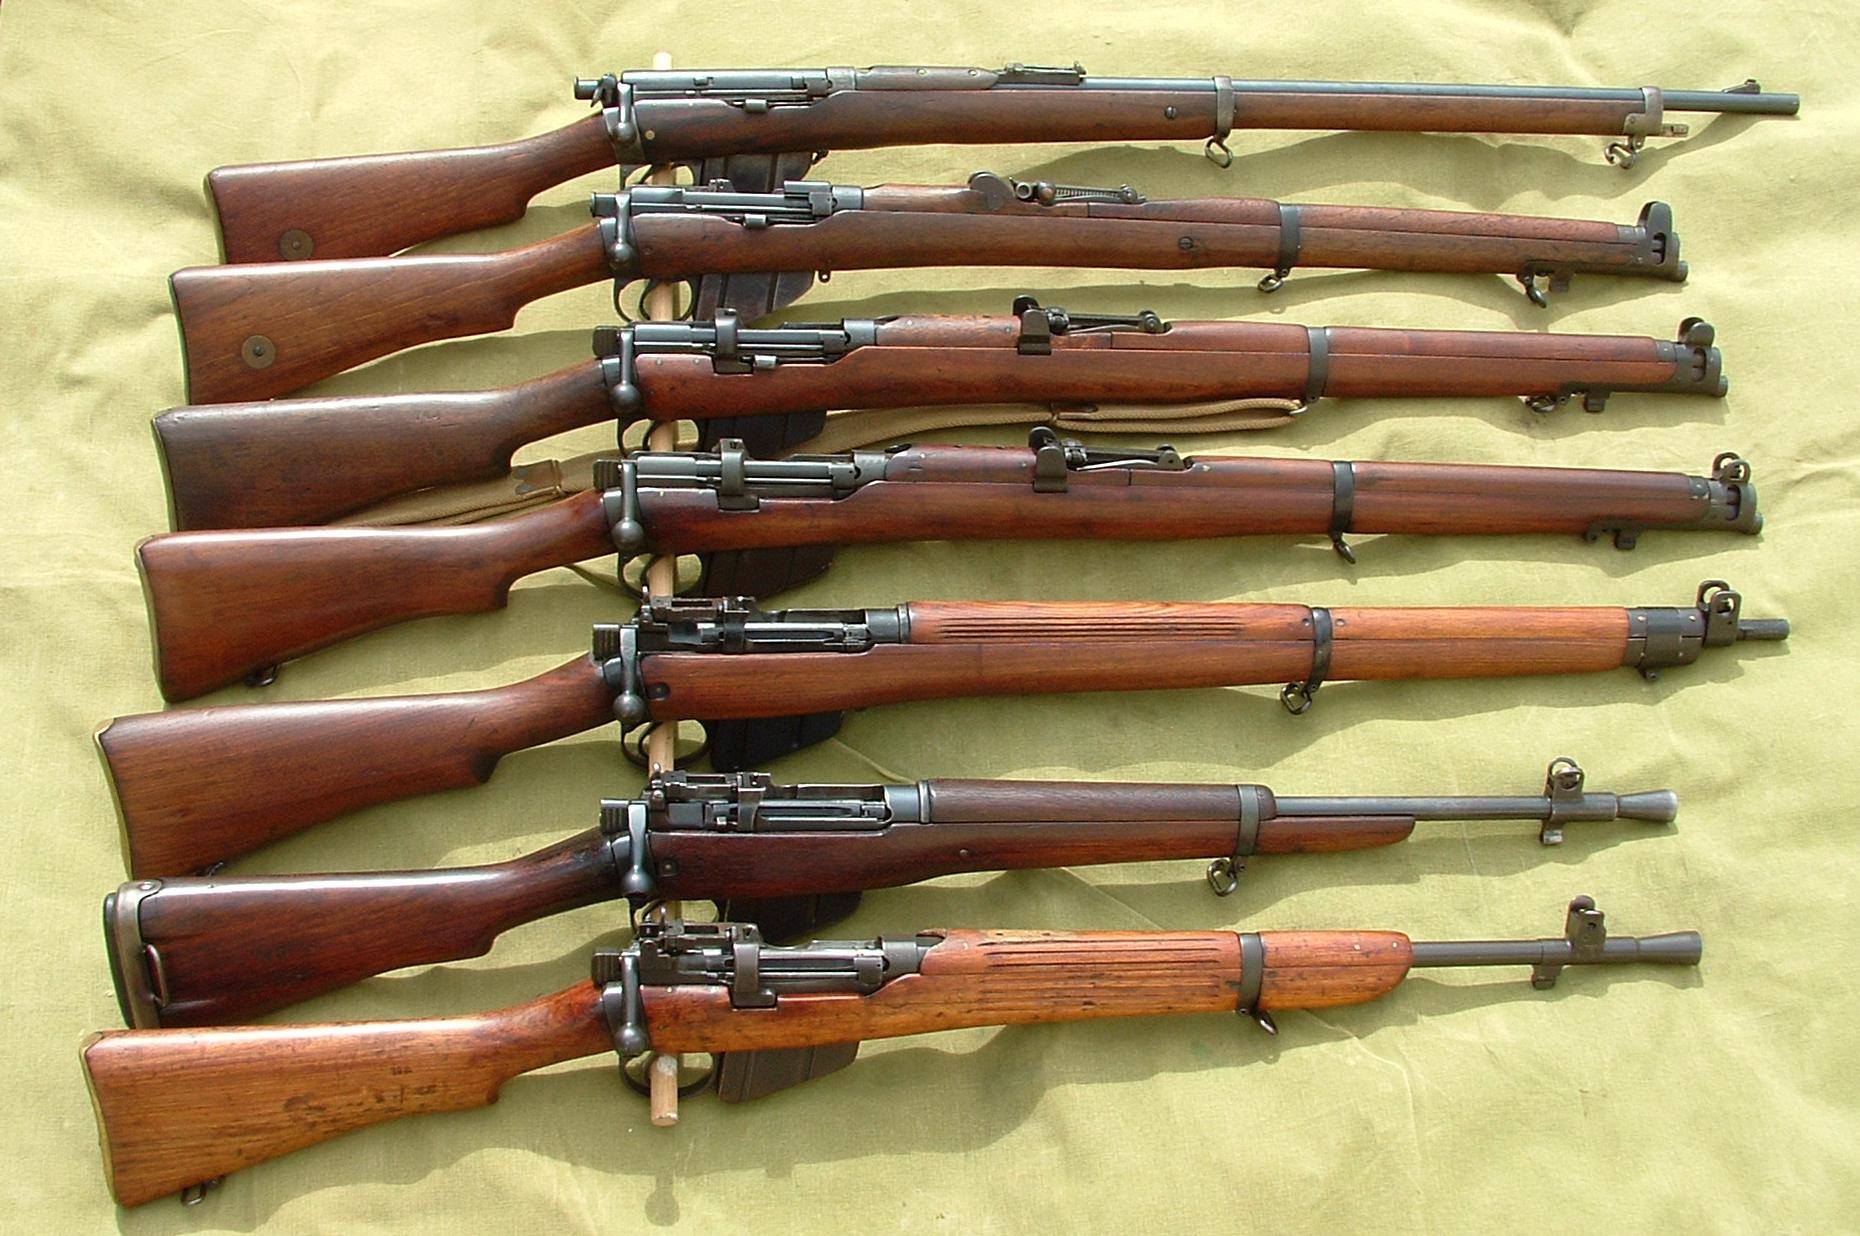 Lee Enfield Rifles for Sale, Lee Enfield for Sale